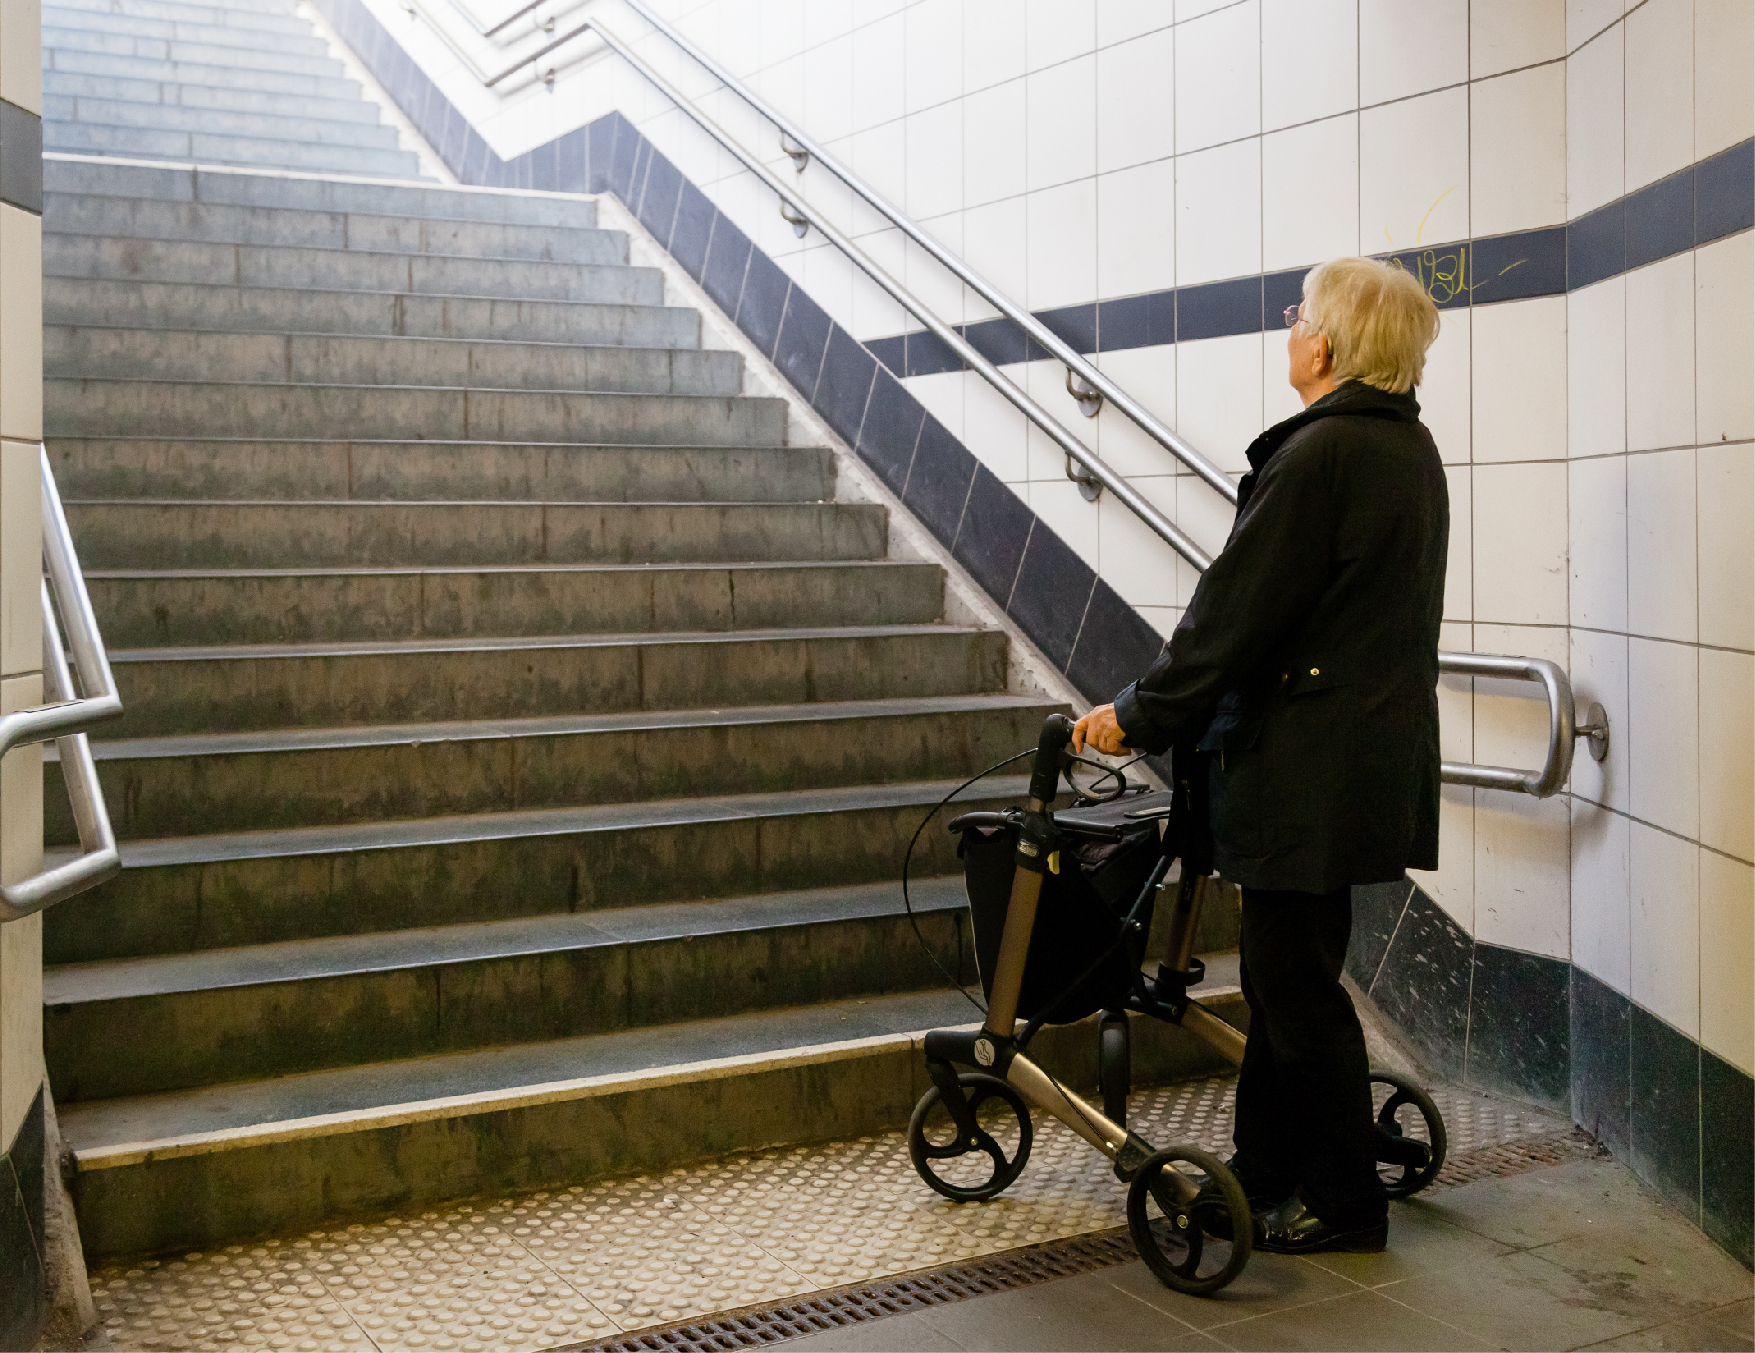 "A woman with short white hair stands with help from a walker looking up at a steep flight of stairs"